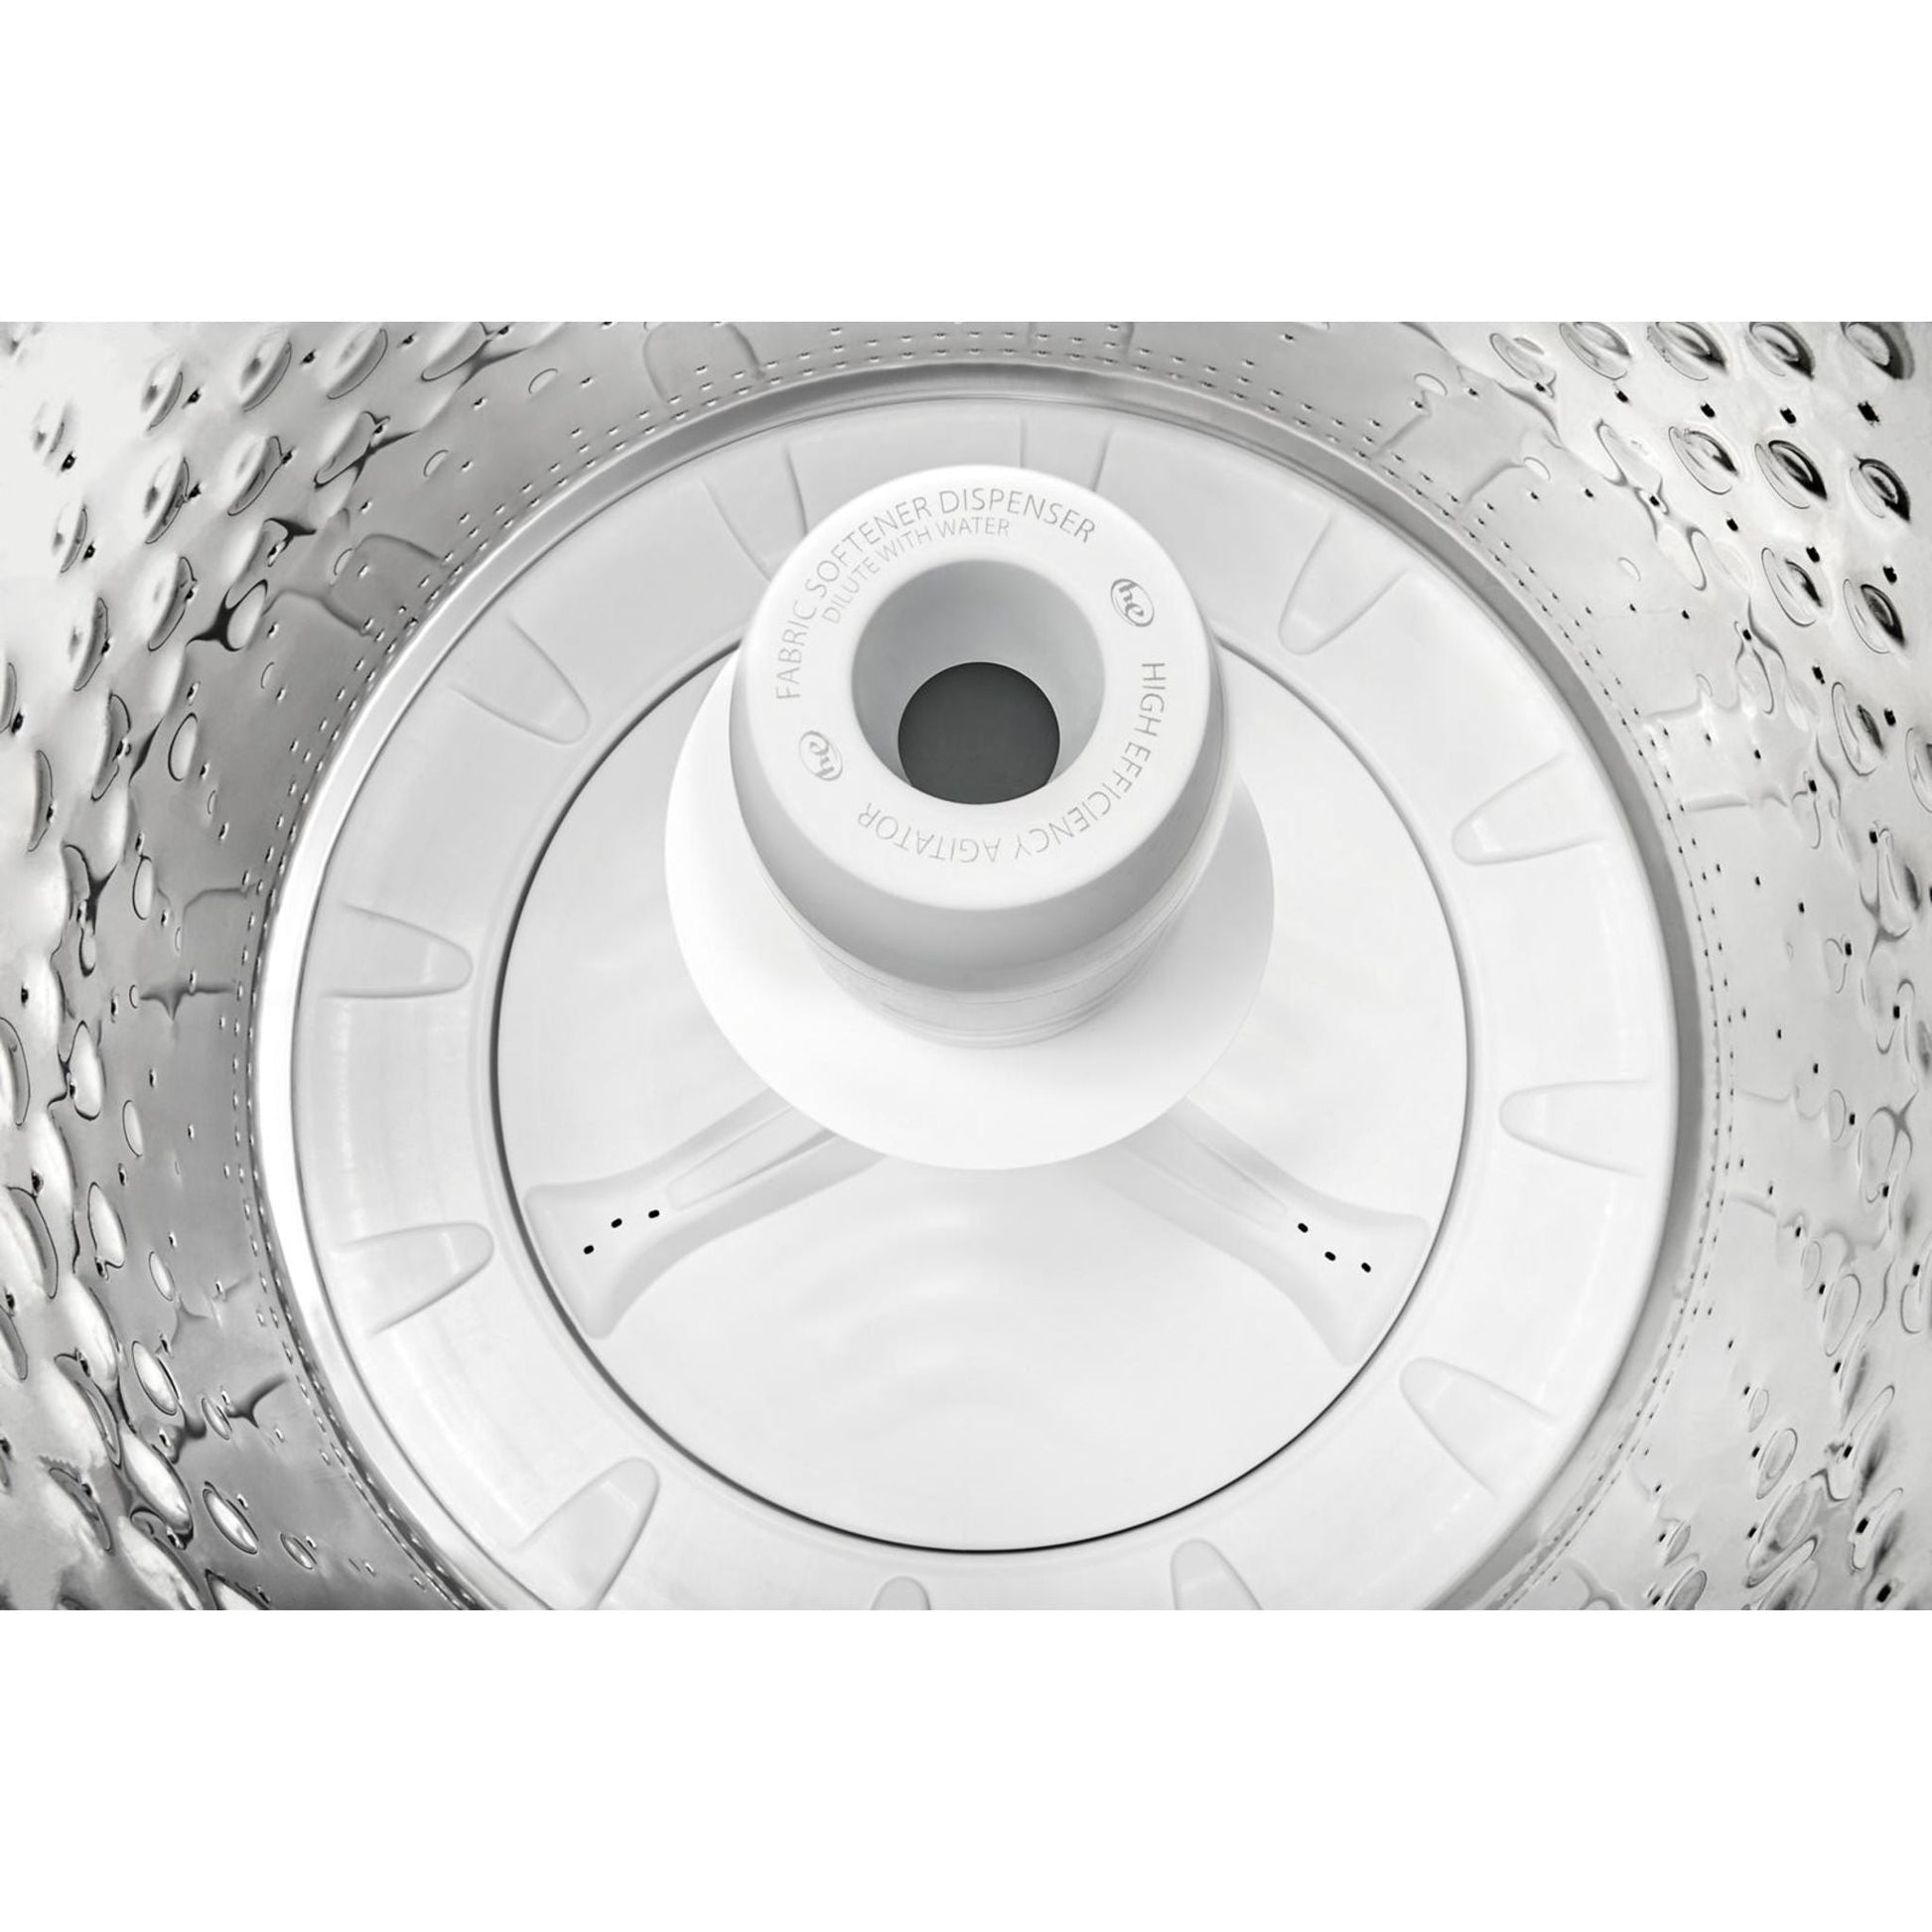 Whirlpool Top Load Washer (WTW5015LW) - WHITE